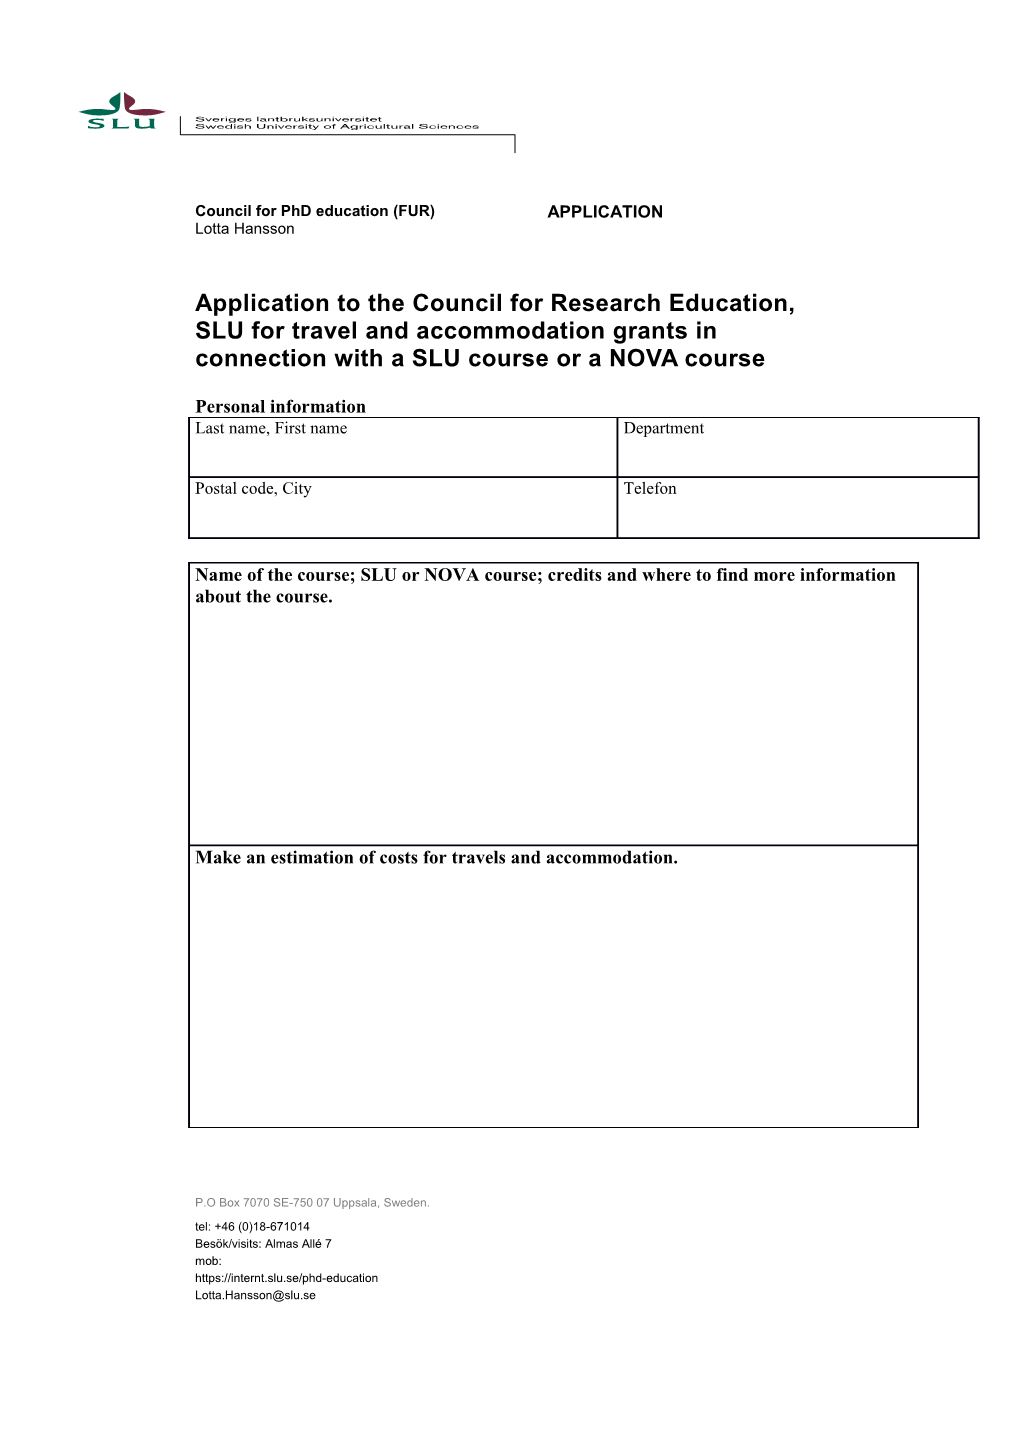 Application to the Council for Research Education, SLU for Travel and Accommodation Grants